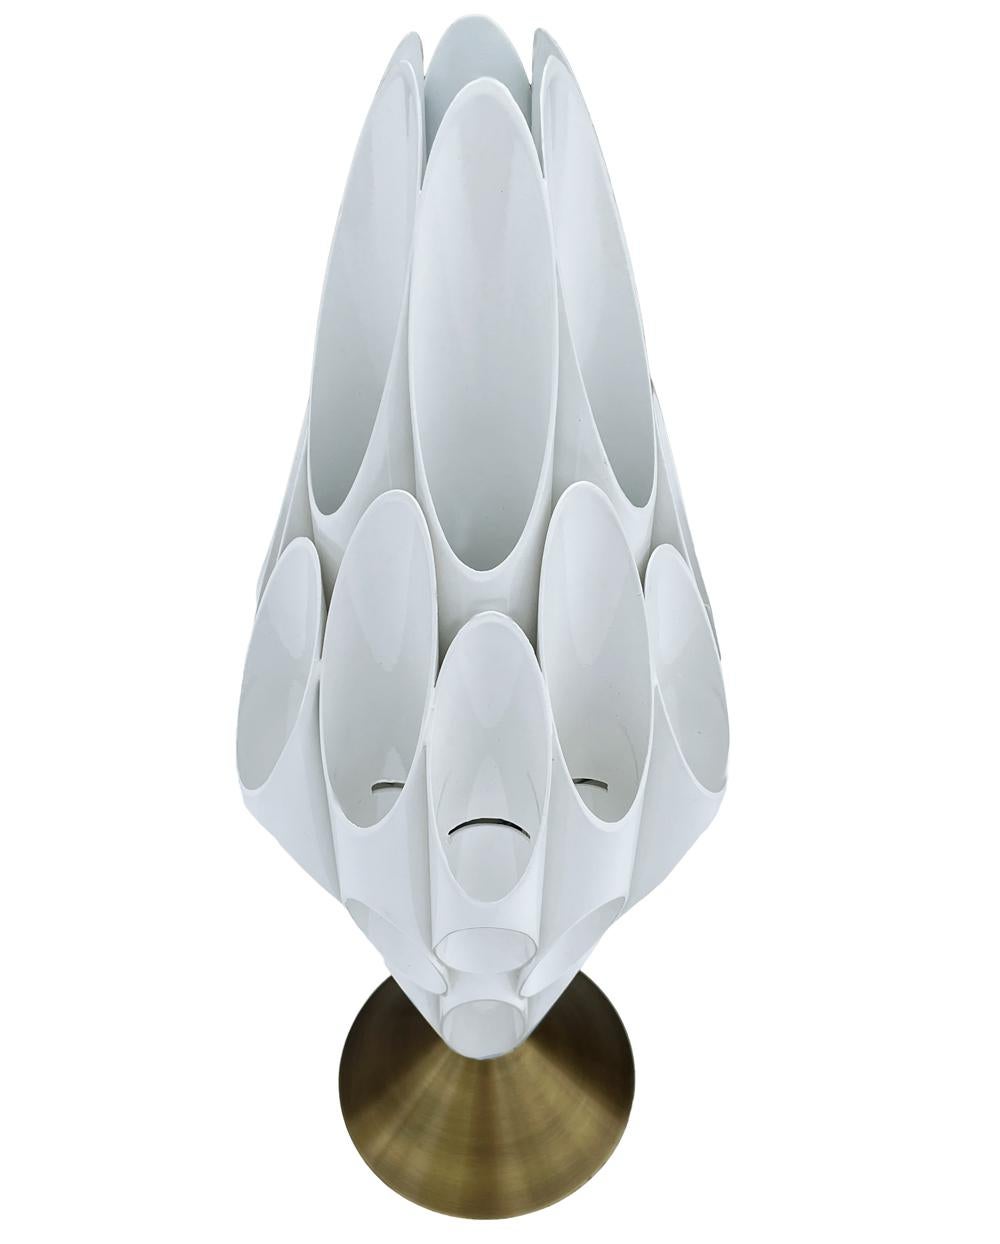 Contemporary Mid-Century Modern Tubular Table Sculpture Lamp in Brass & White After Rougier For Sale